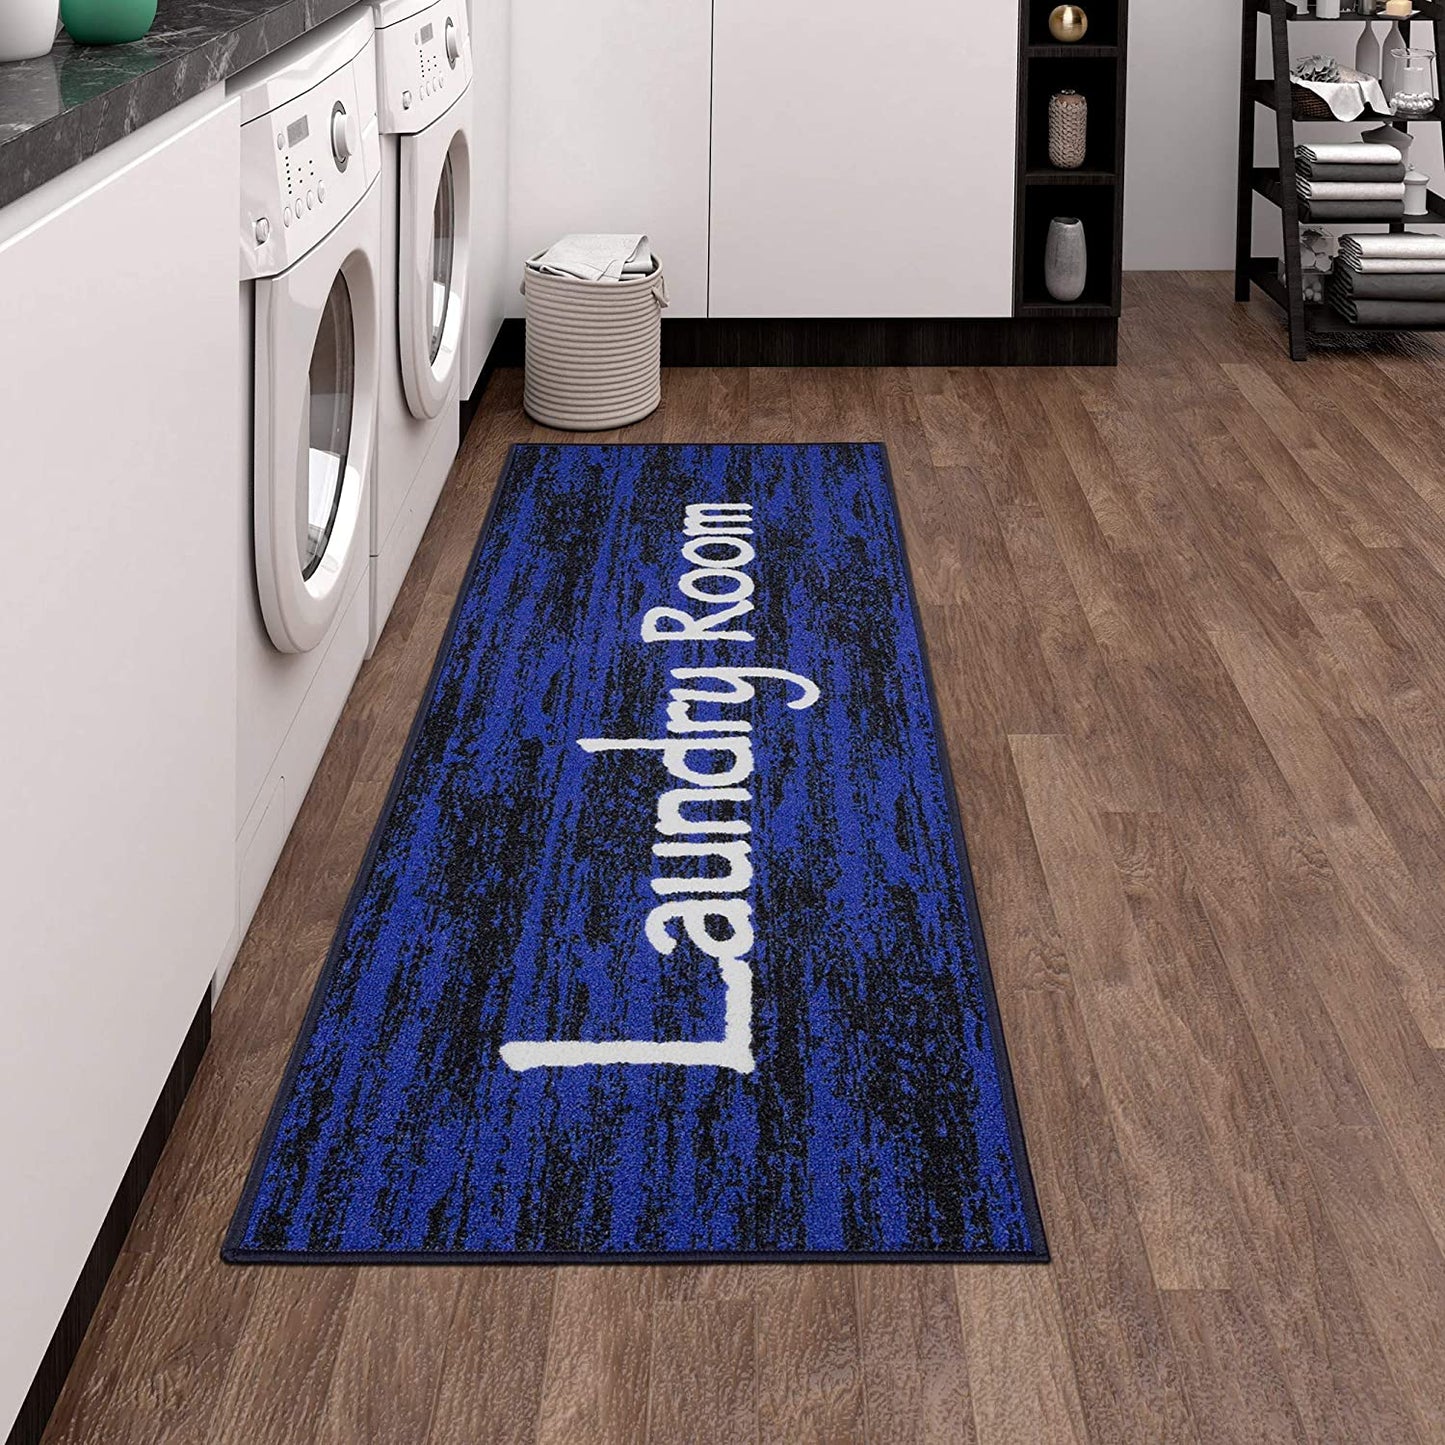 Laundry Collection Area Rug, Blue Striped